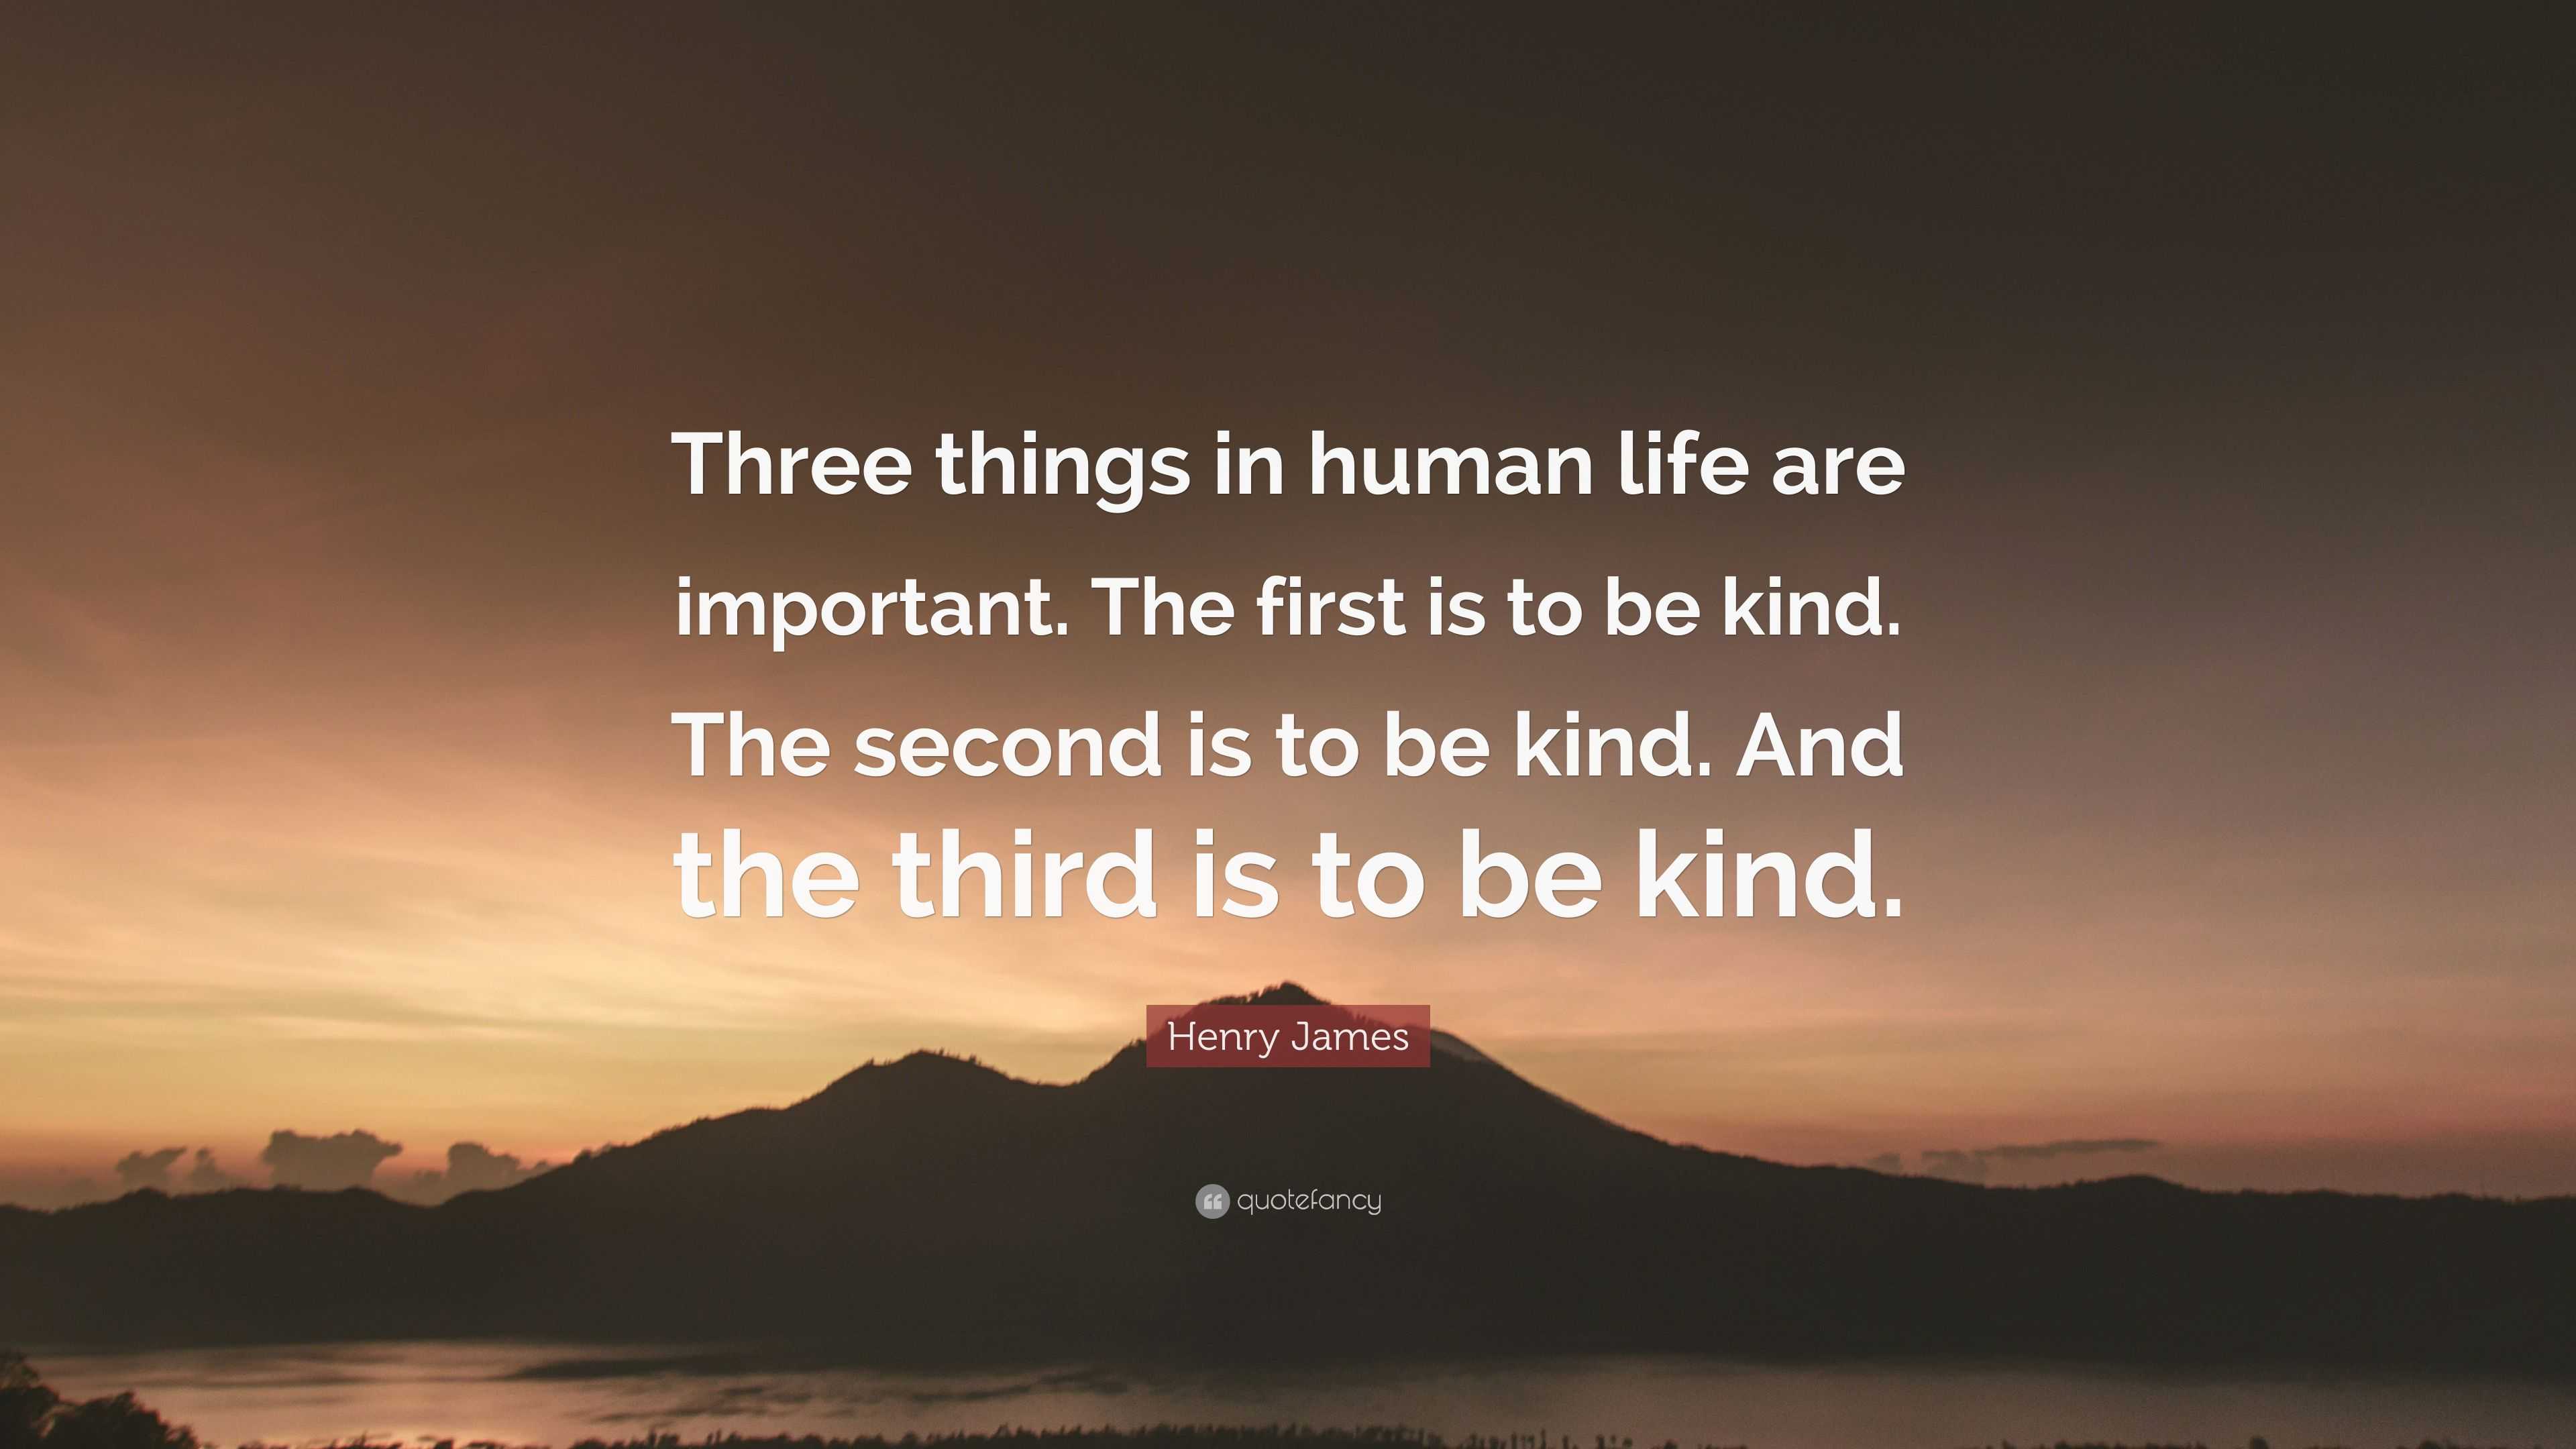 what are the three important things in human life